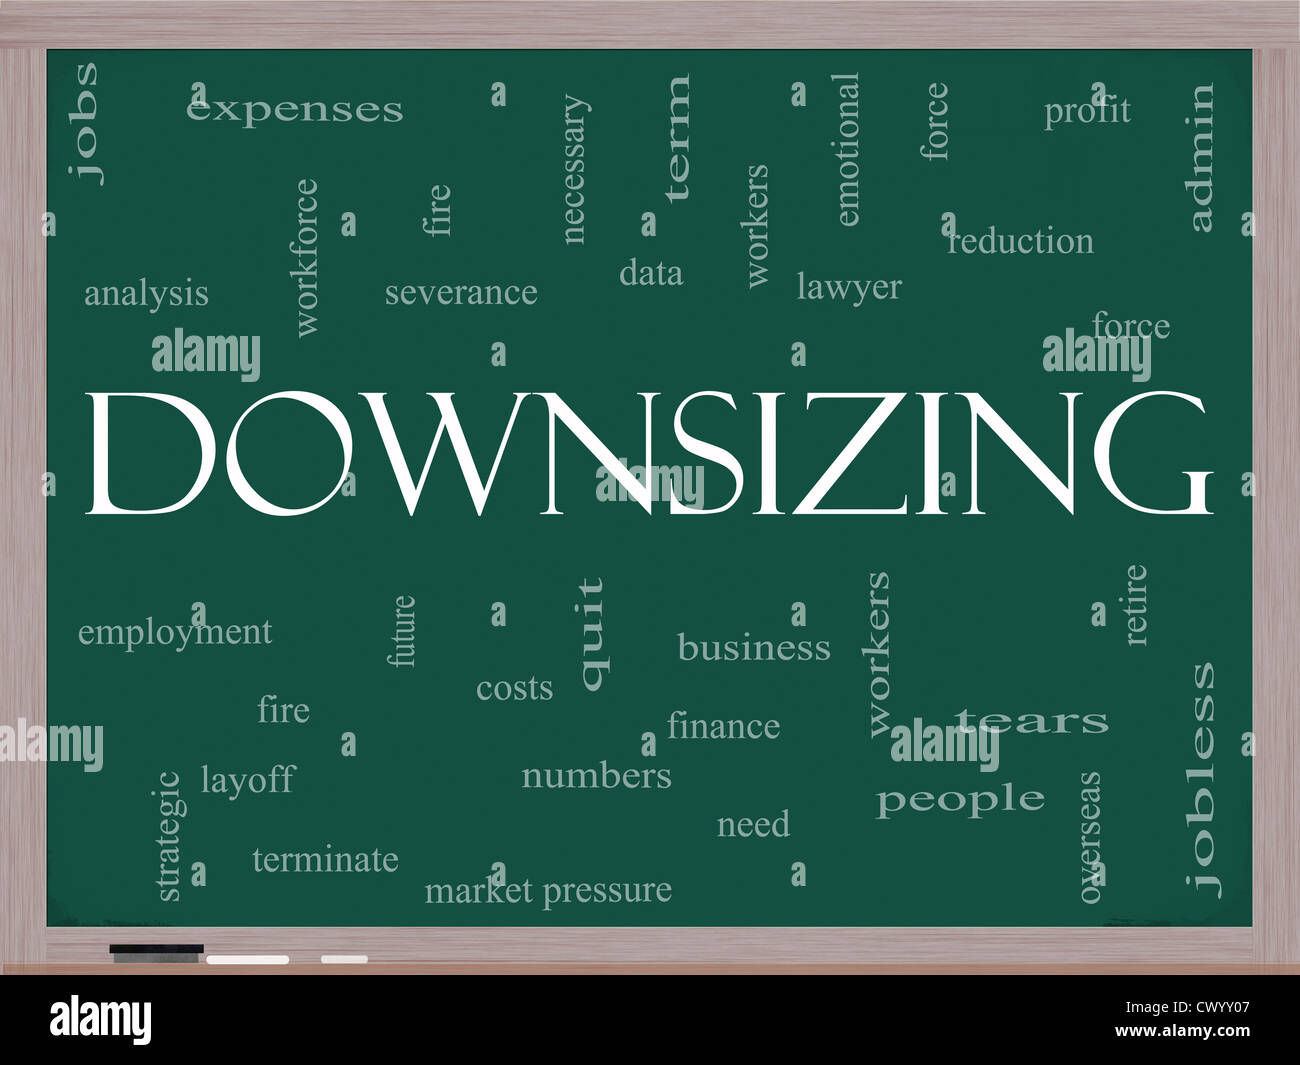 Downsizing Word Cloud Concept on a Blackboard with great terms such as fire, layoff, terminate, severance and more. Stock Photo